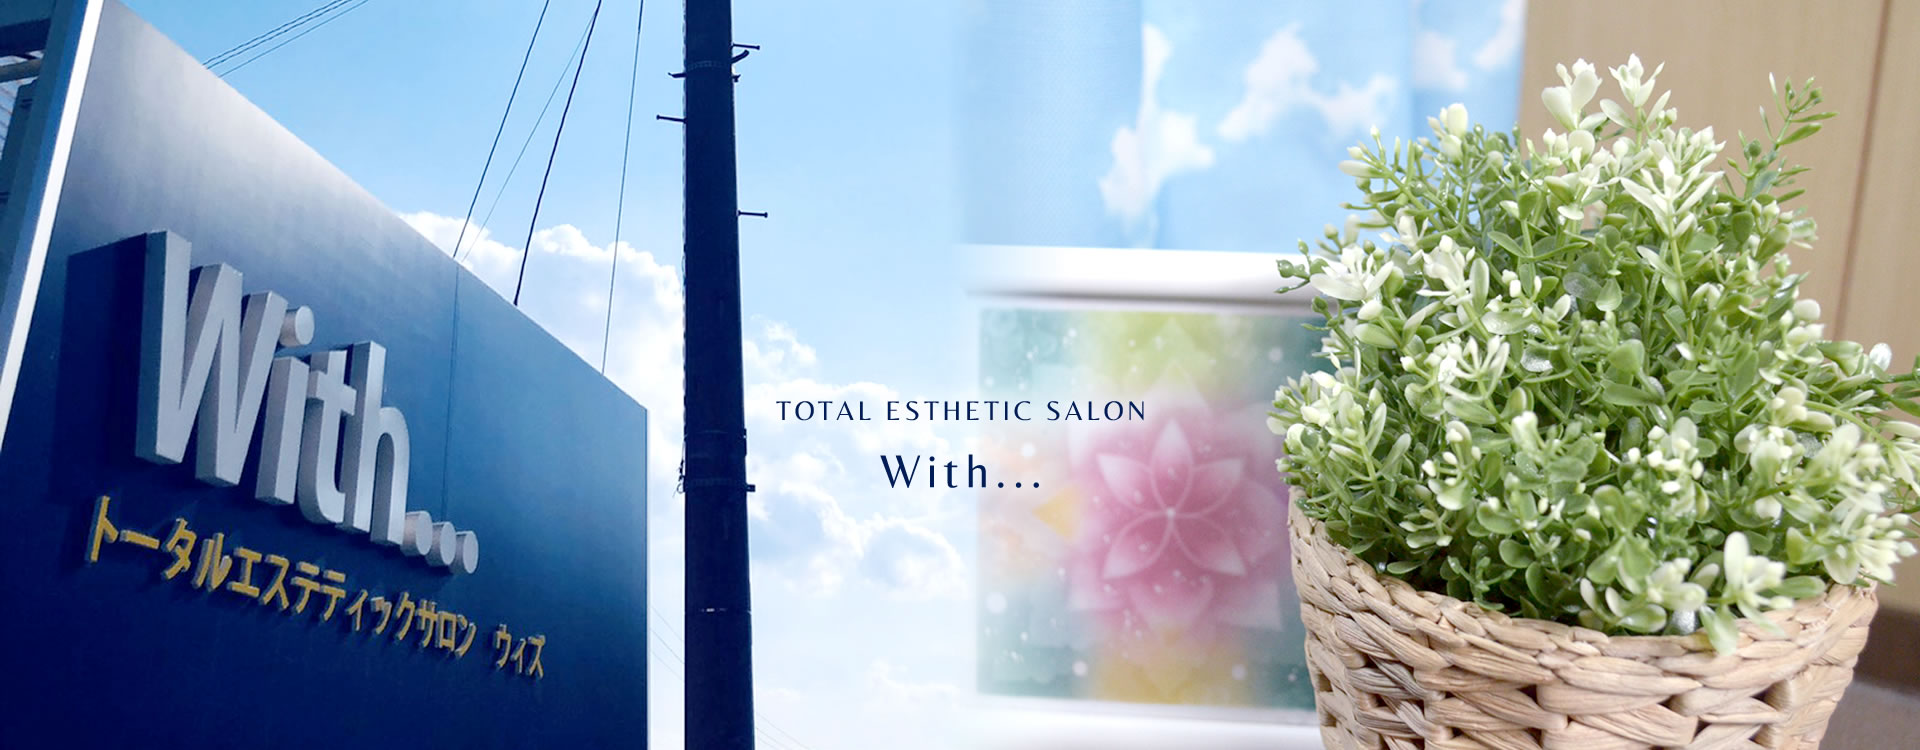 TOTAL ESTHETIC SALON With...